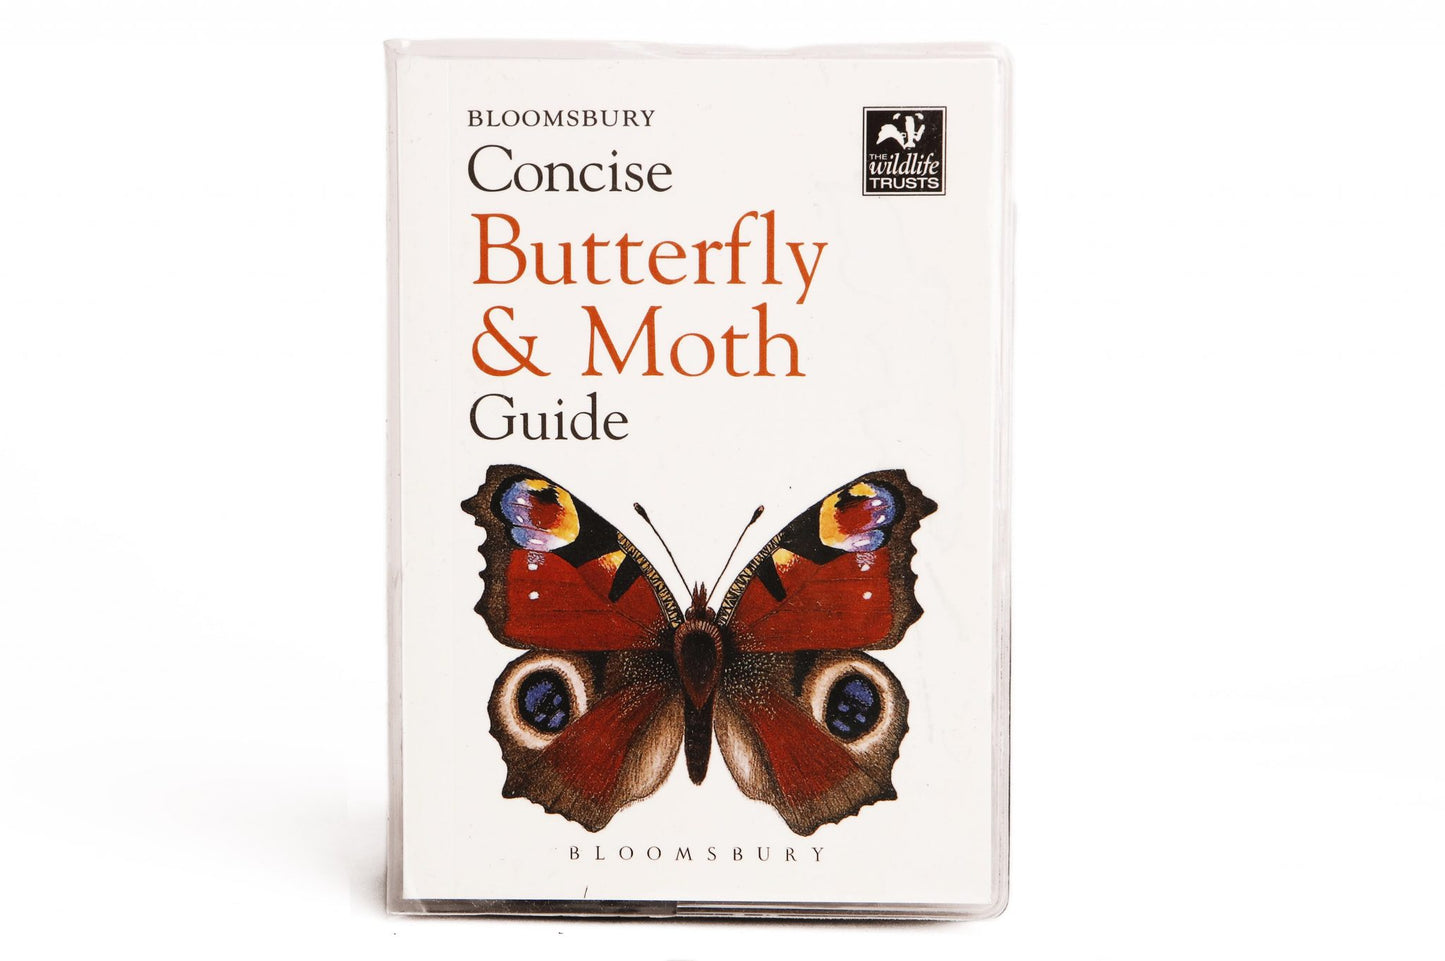 Bloomsbury Concise Butterfly and Moth Guide